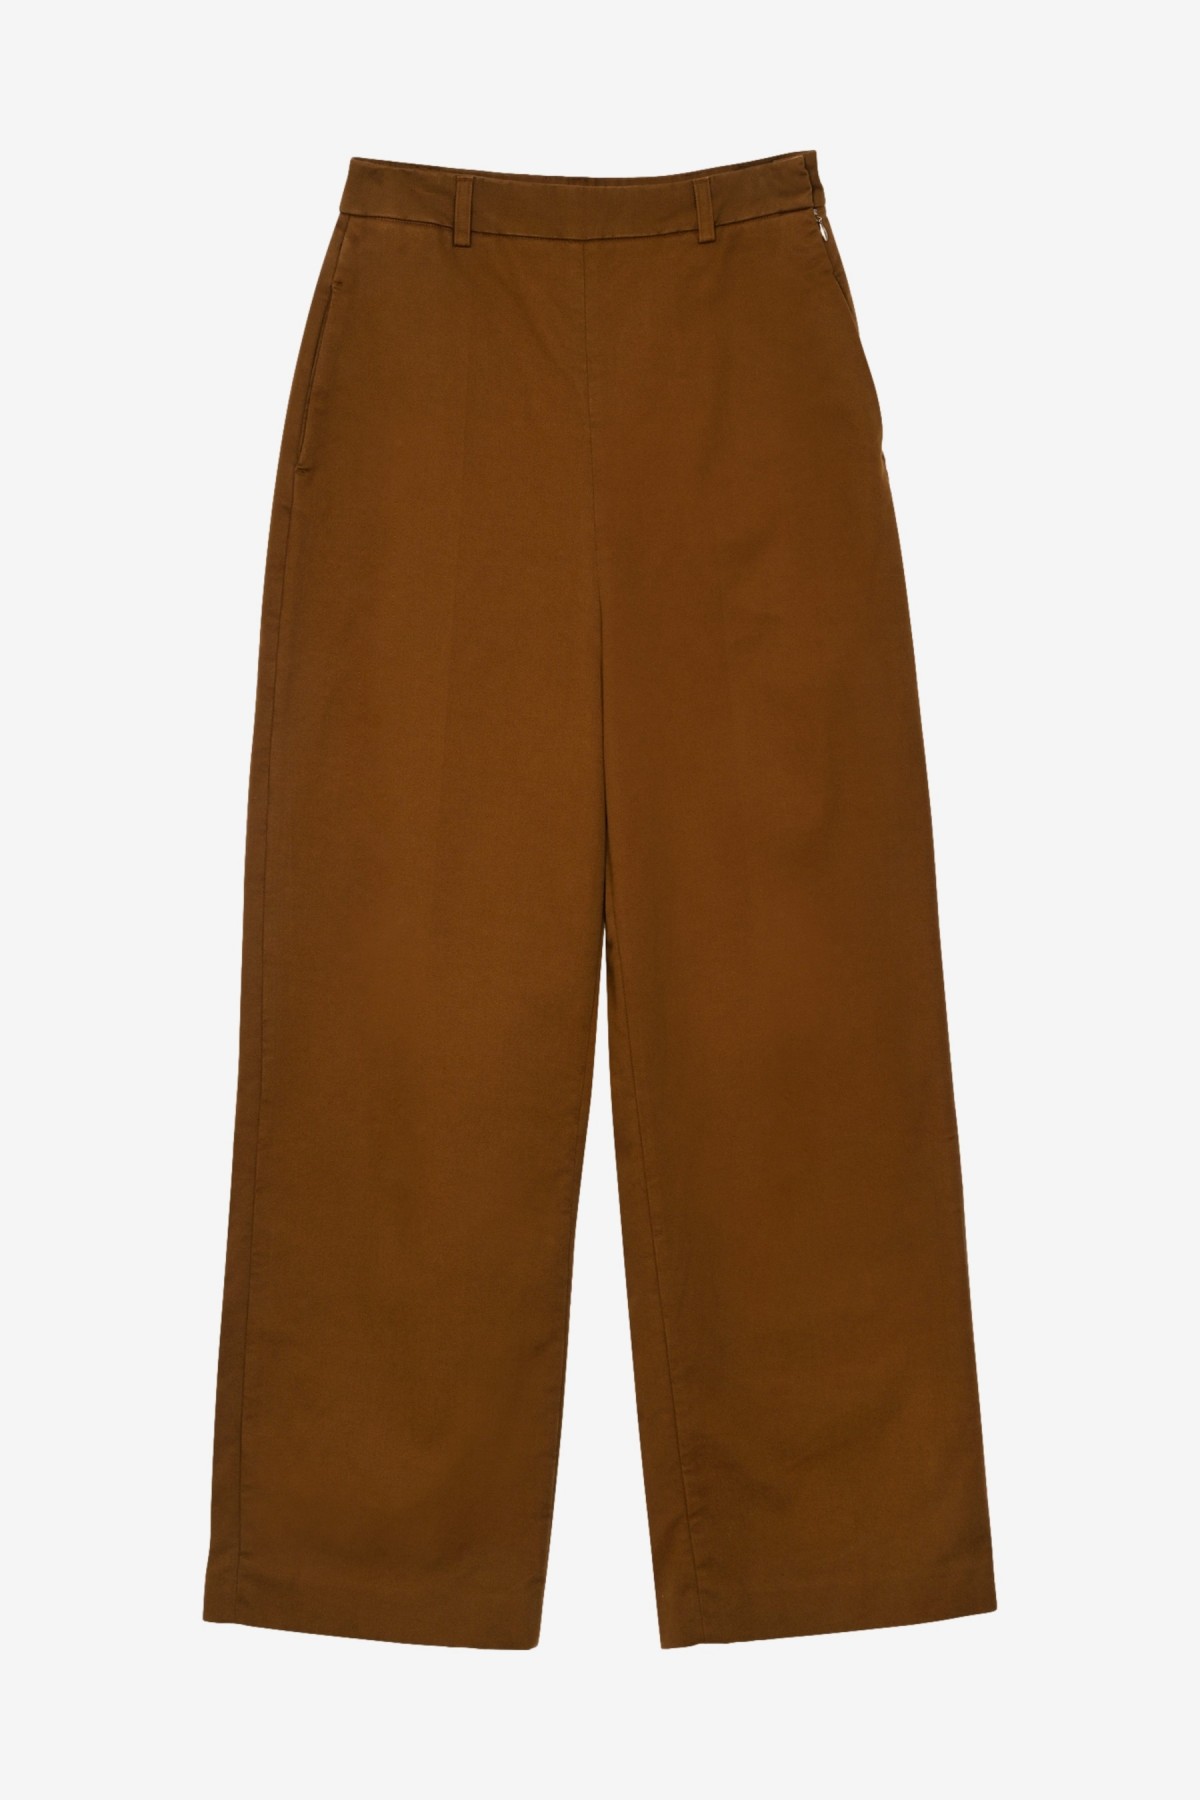 YMC You Must Create Victoria Trouser in Brown